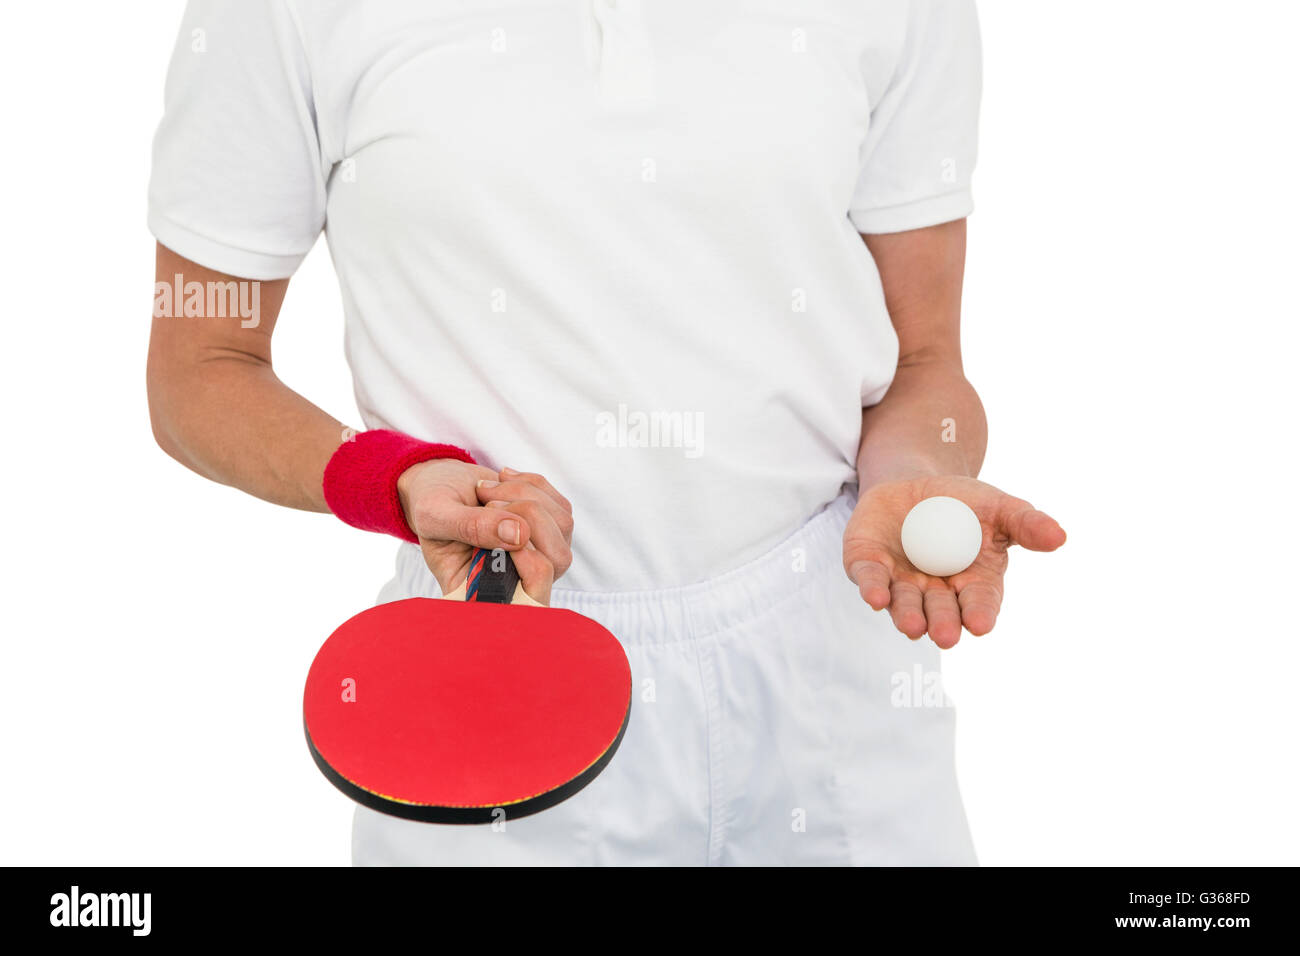 Female athlete holding table tennis paddle and ball Stock Photo